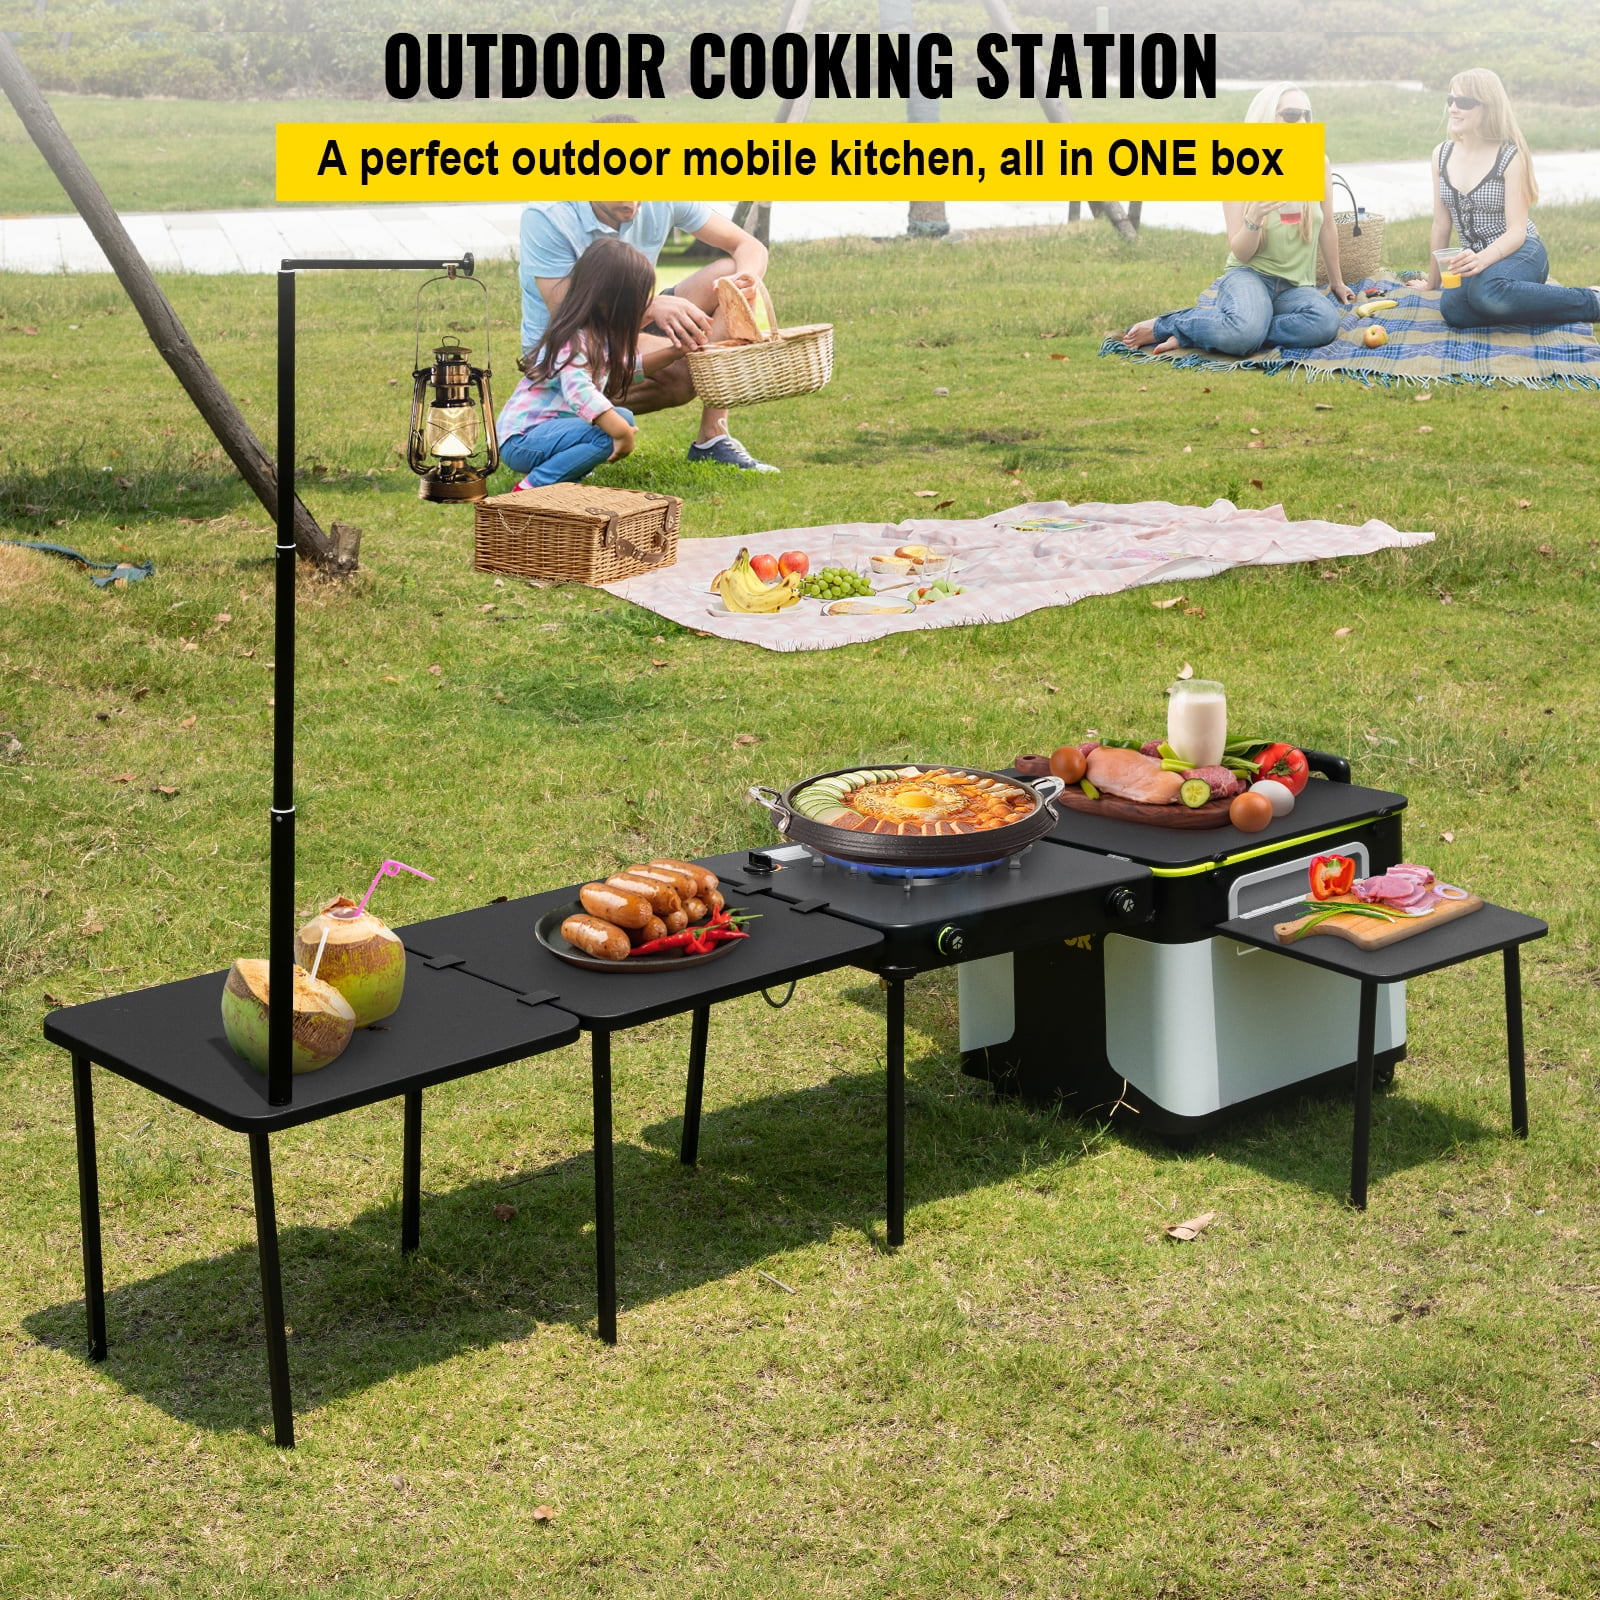 Outdoor Mobile Kitchen Portable Stove Camping Field Cooking Utensils  Camping Supplies Vehicle Self-driving Travel Equipment,Camping Kitchen